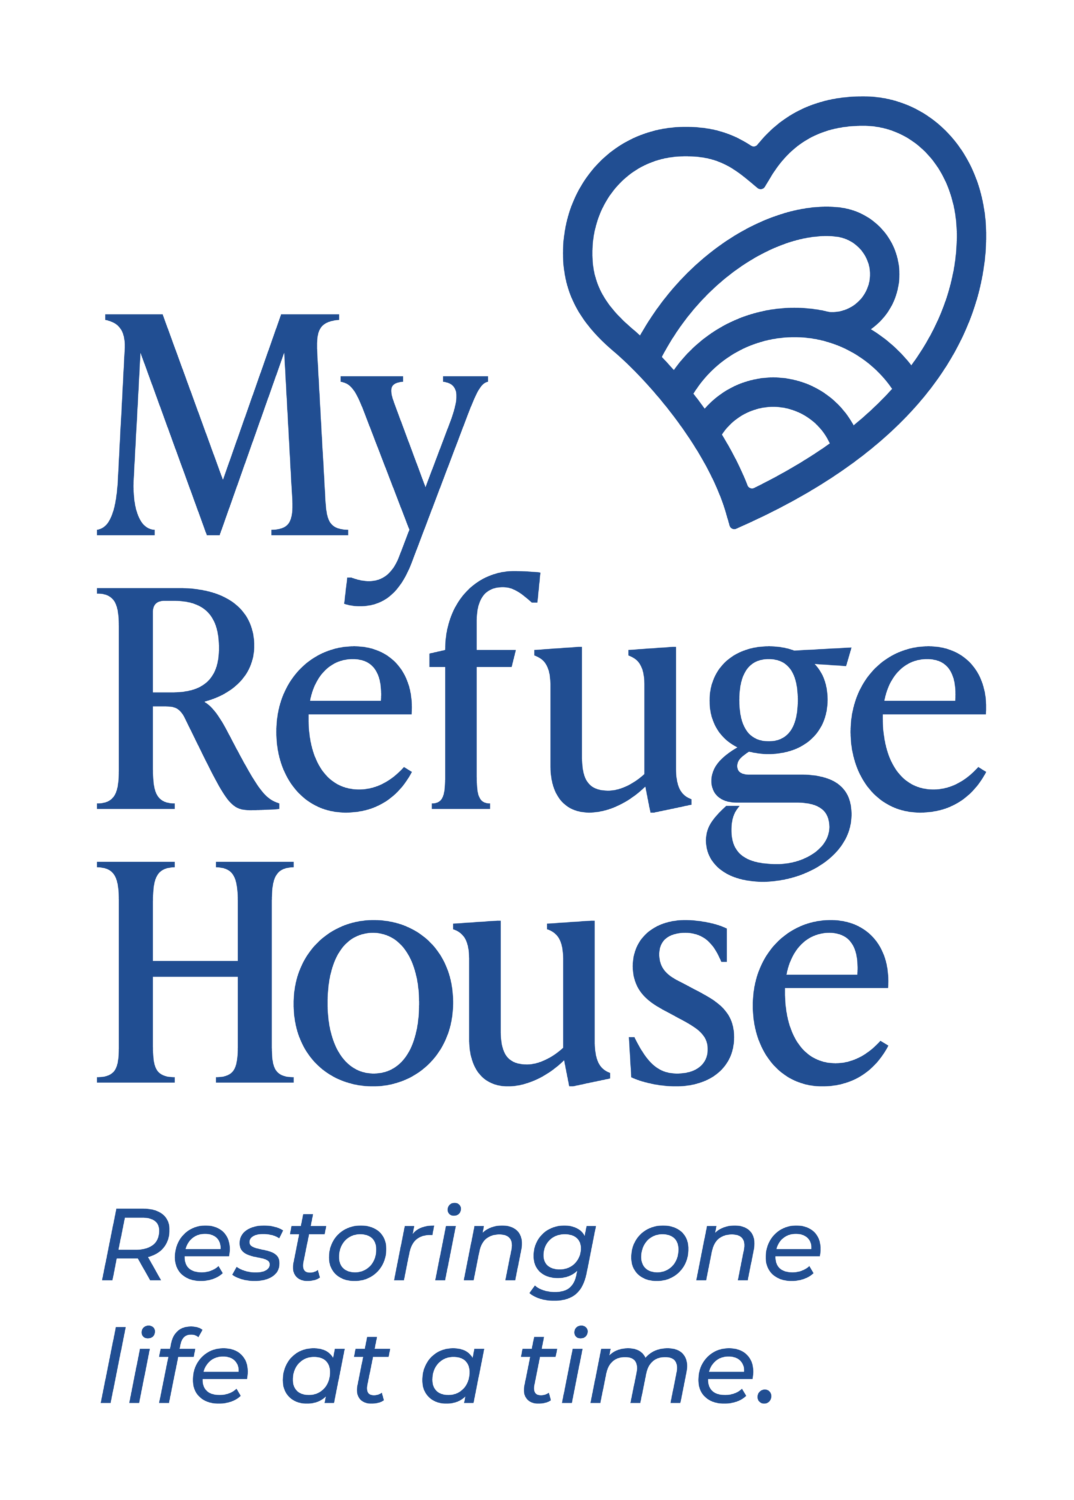 My Refuge House – Restoring one life at a time